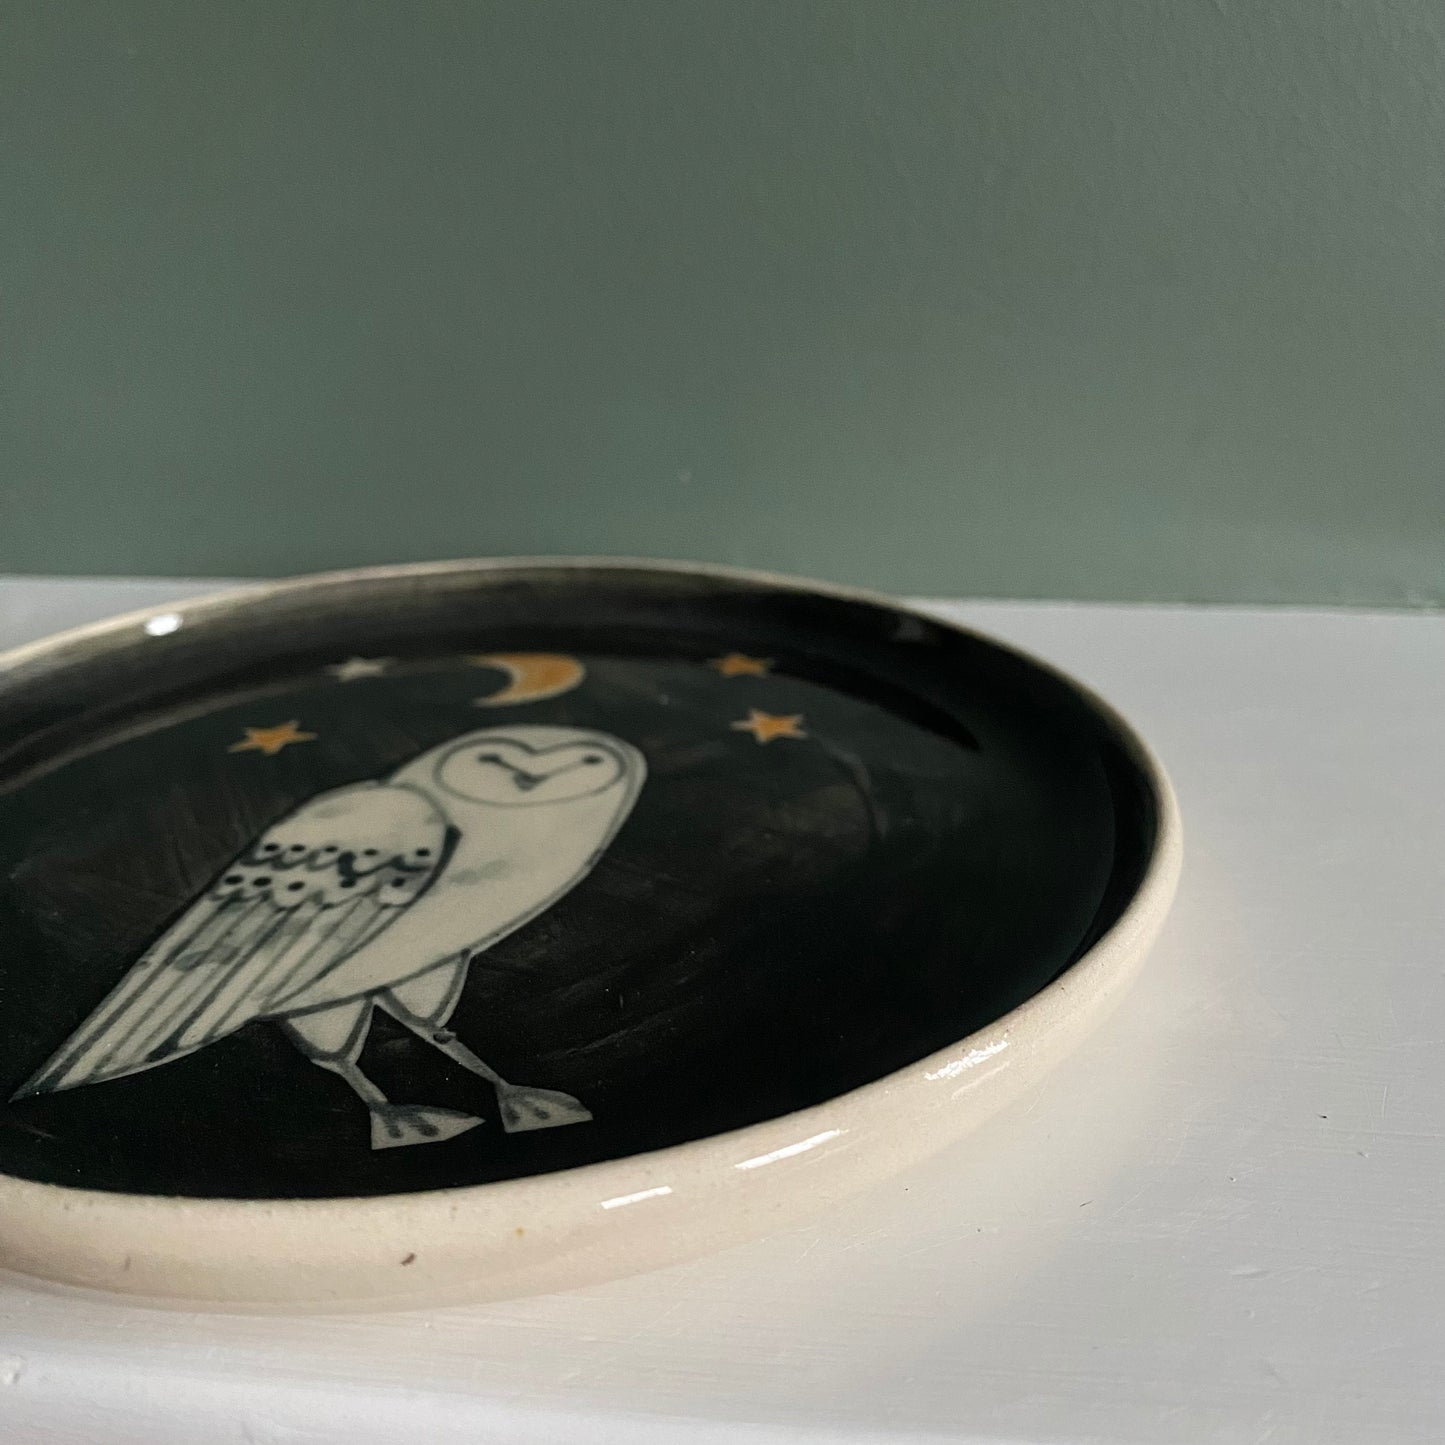 Owl small Stoneware plate with Bird Illustrated round with black background colour and bird line illustration.